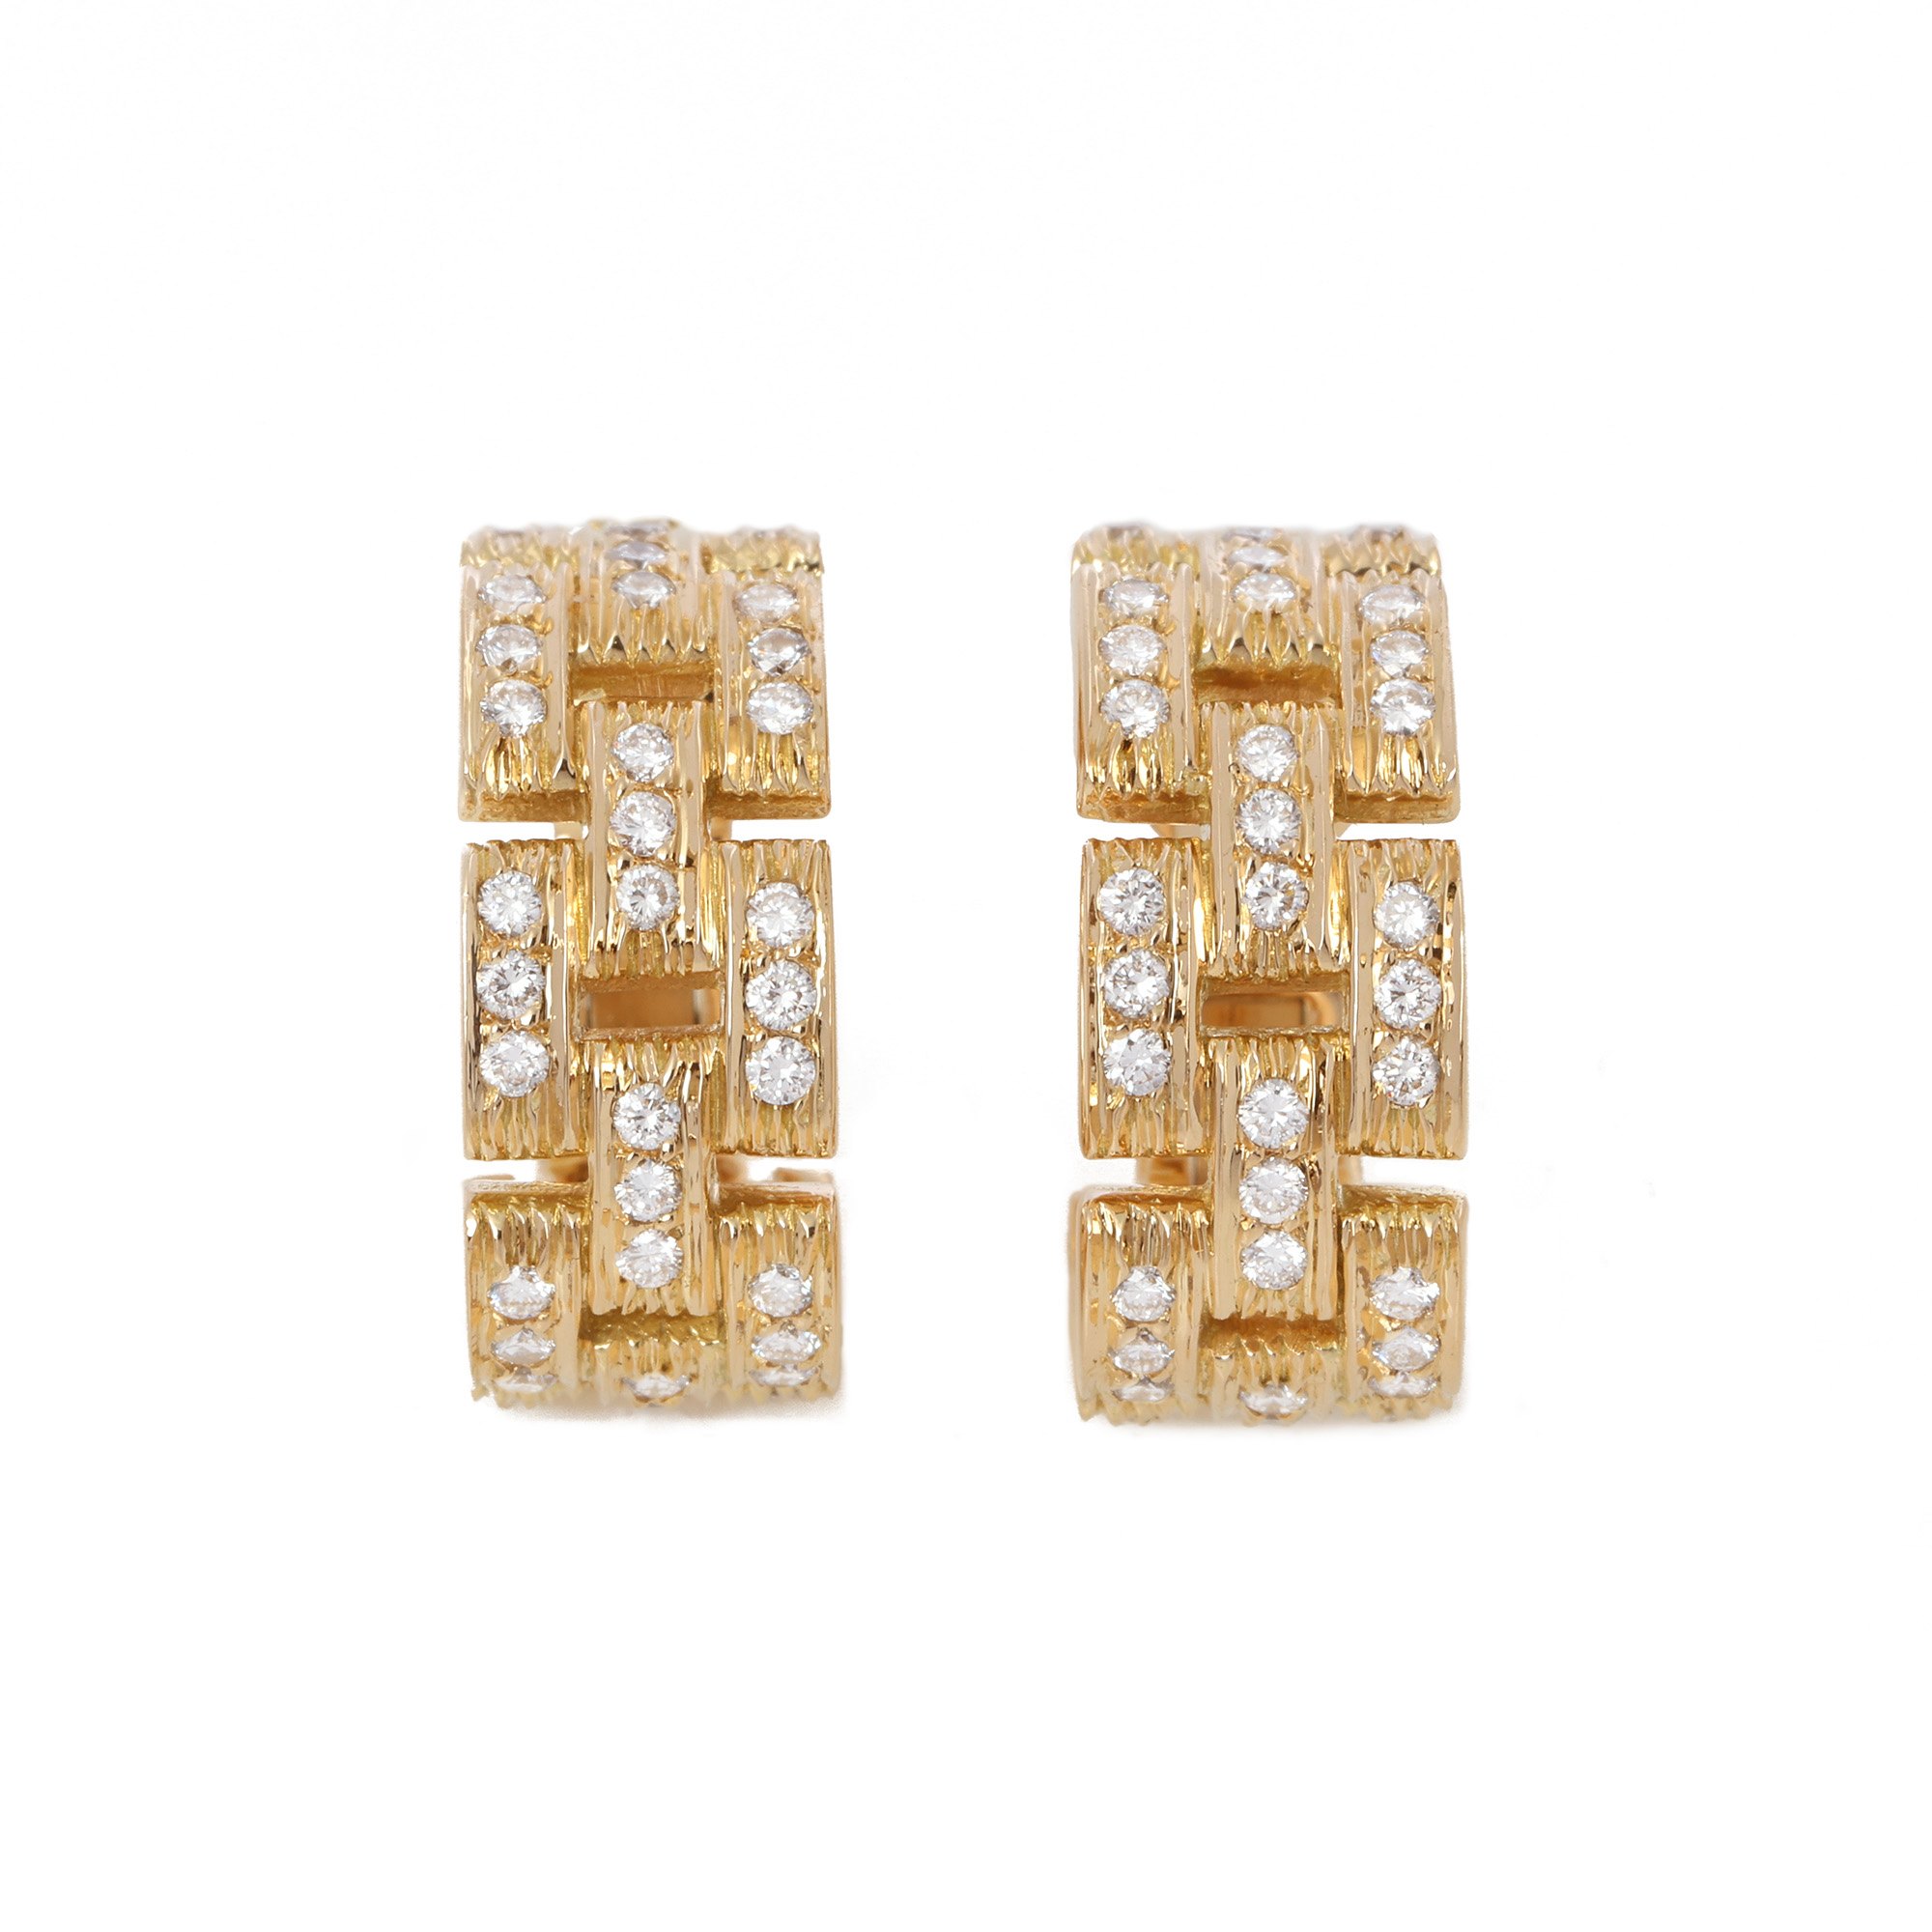 Cartier Maillon Panthere Diamond Paved Earrings